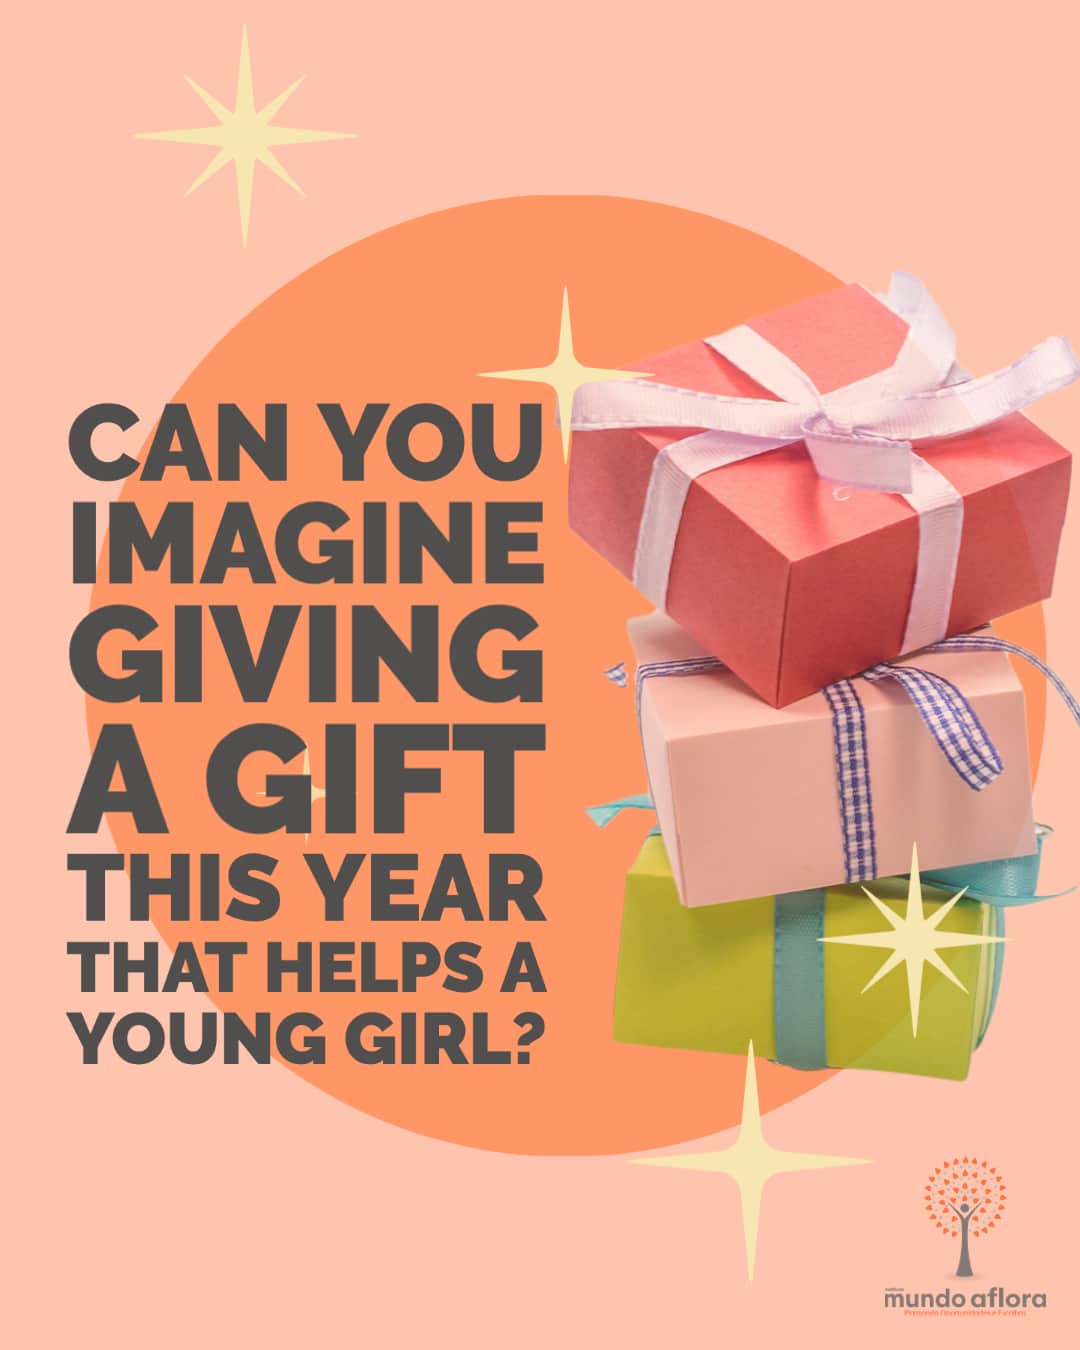 Jamonのインスタグラム：「This is the time of year when we exchange gifts with our families and friends. We know this has been a challenging year for all, so we thought we could help with a gift suggestion. In this life-altering year, why not give a life-changing gift?⠀ ⠀ Young girls in vulnerable situations are not supported by society or the government, and without adequate opportunities, access to education, or knowledge of their rights, they are often left exposed to crime and at high risk of recidivism. We bring opportunities to girls inside and outside the juvenile justice system, offering them new choices and expanded dreams, as well as support in developing self-confidence, resilience, and the skills necessary to lead a life of dignity in the outside world.⠀ Donate to our campaign and give the gift of transforming lives⠀ ⠀ Link in Bio or https://doabrasil.org.br/instituto-mundo-aflora/jamon-the-pig⠀ ⠀ #dayofgiving #transformlives #shareacause #transformdreams」